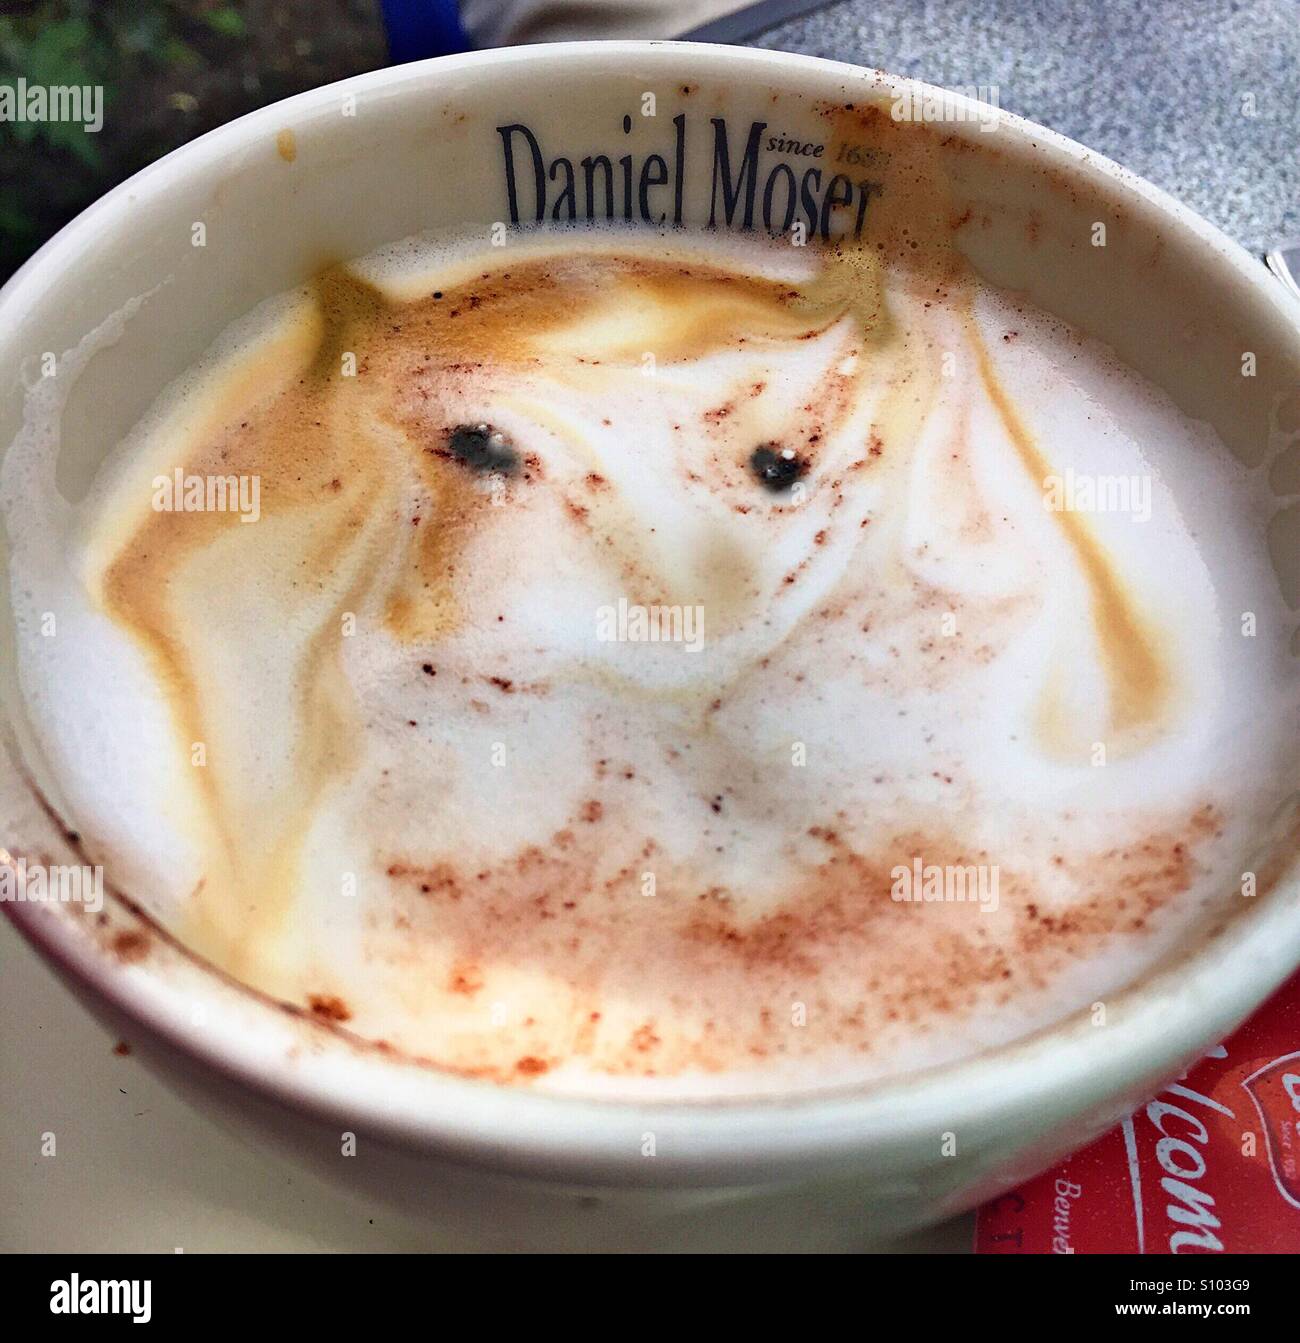 ...the hidden cat face in the coffee... Stock Photo